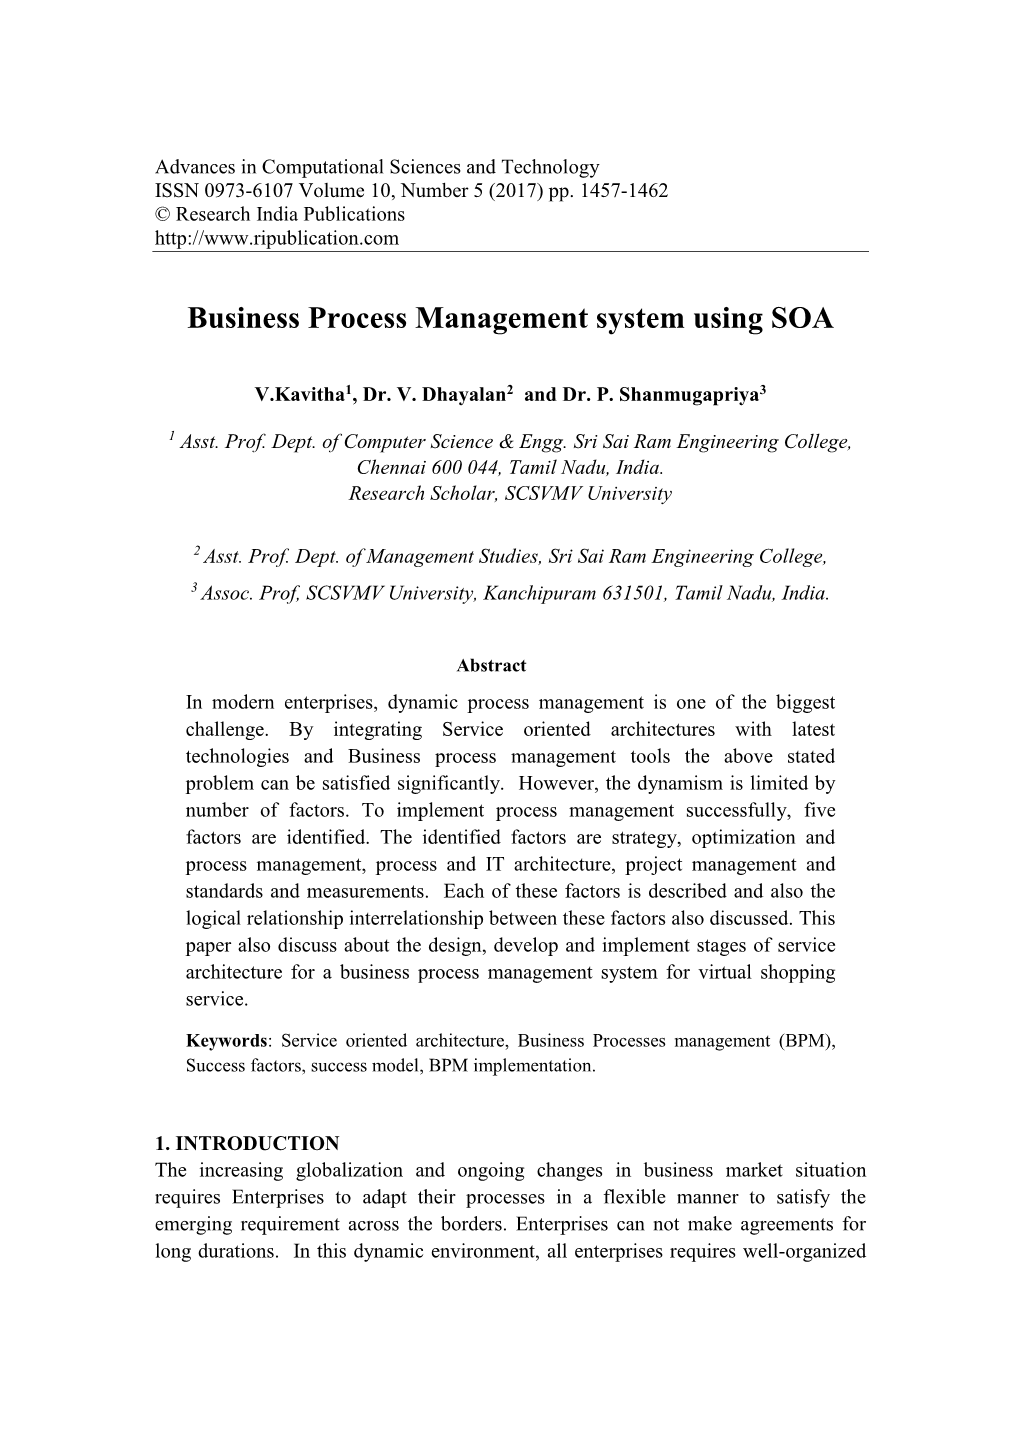 Business Process Management System Using SOA